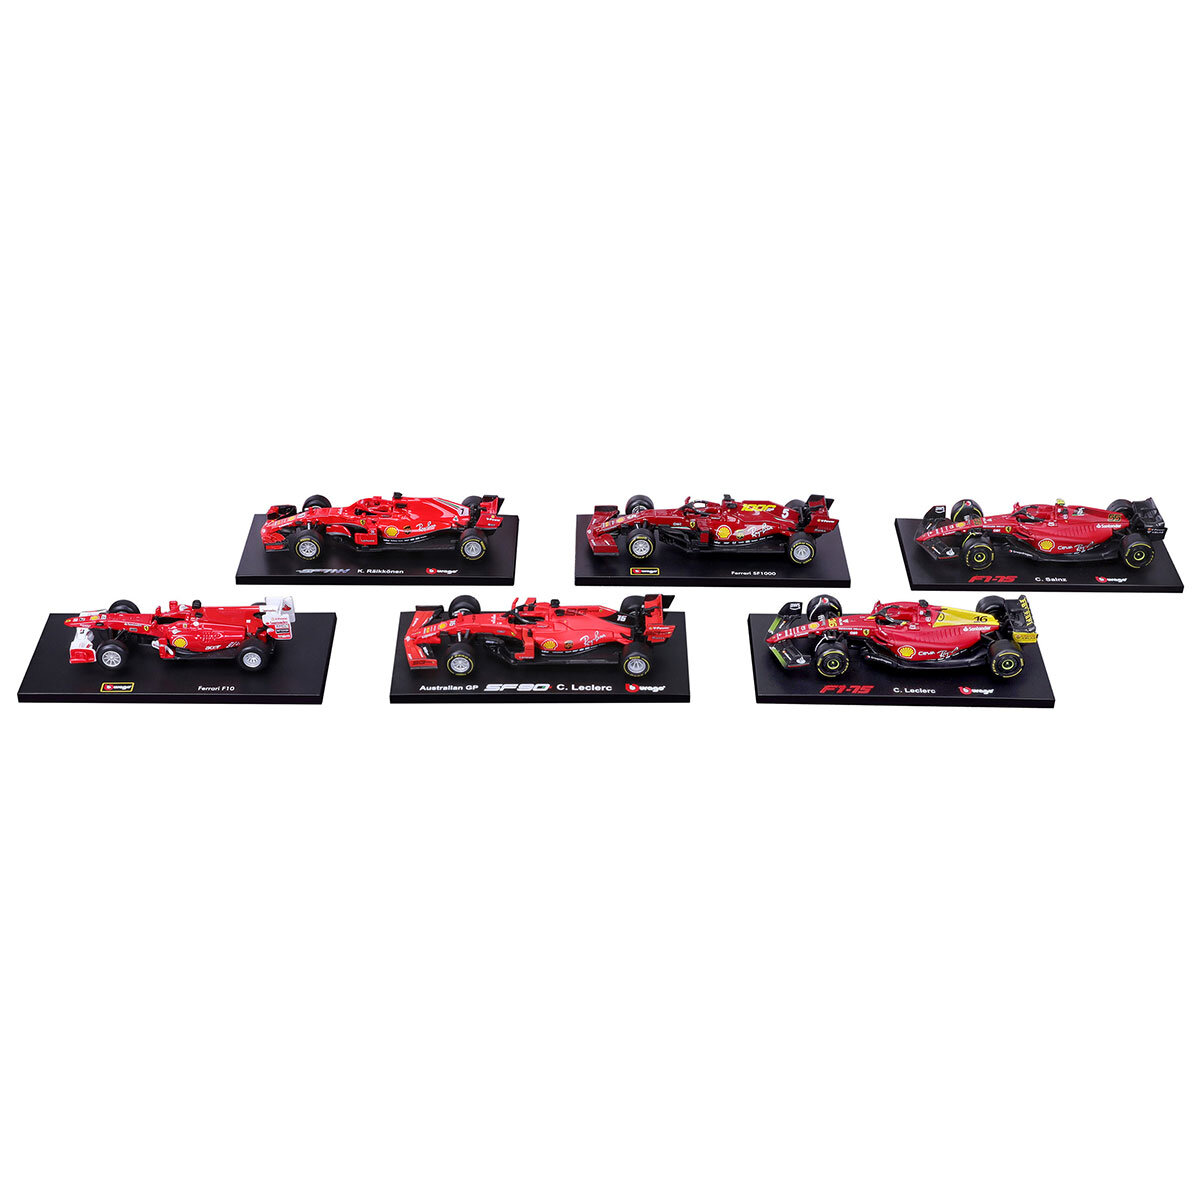 Maisto 1:43 Scale Highly Detailed Formula One Cars 6 Pack